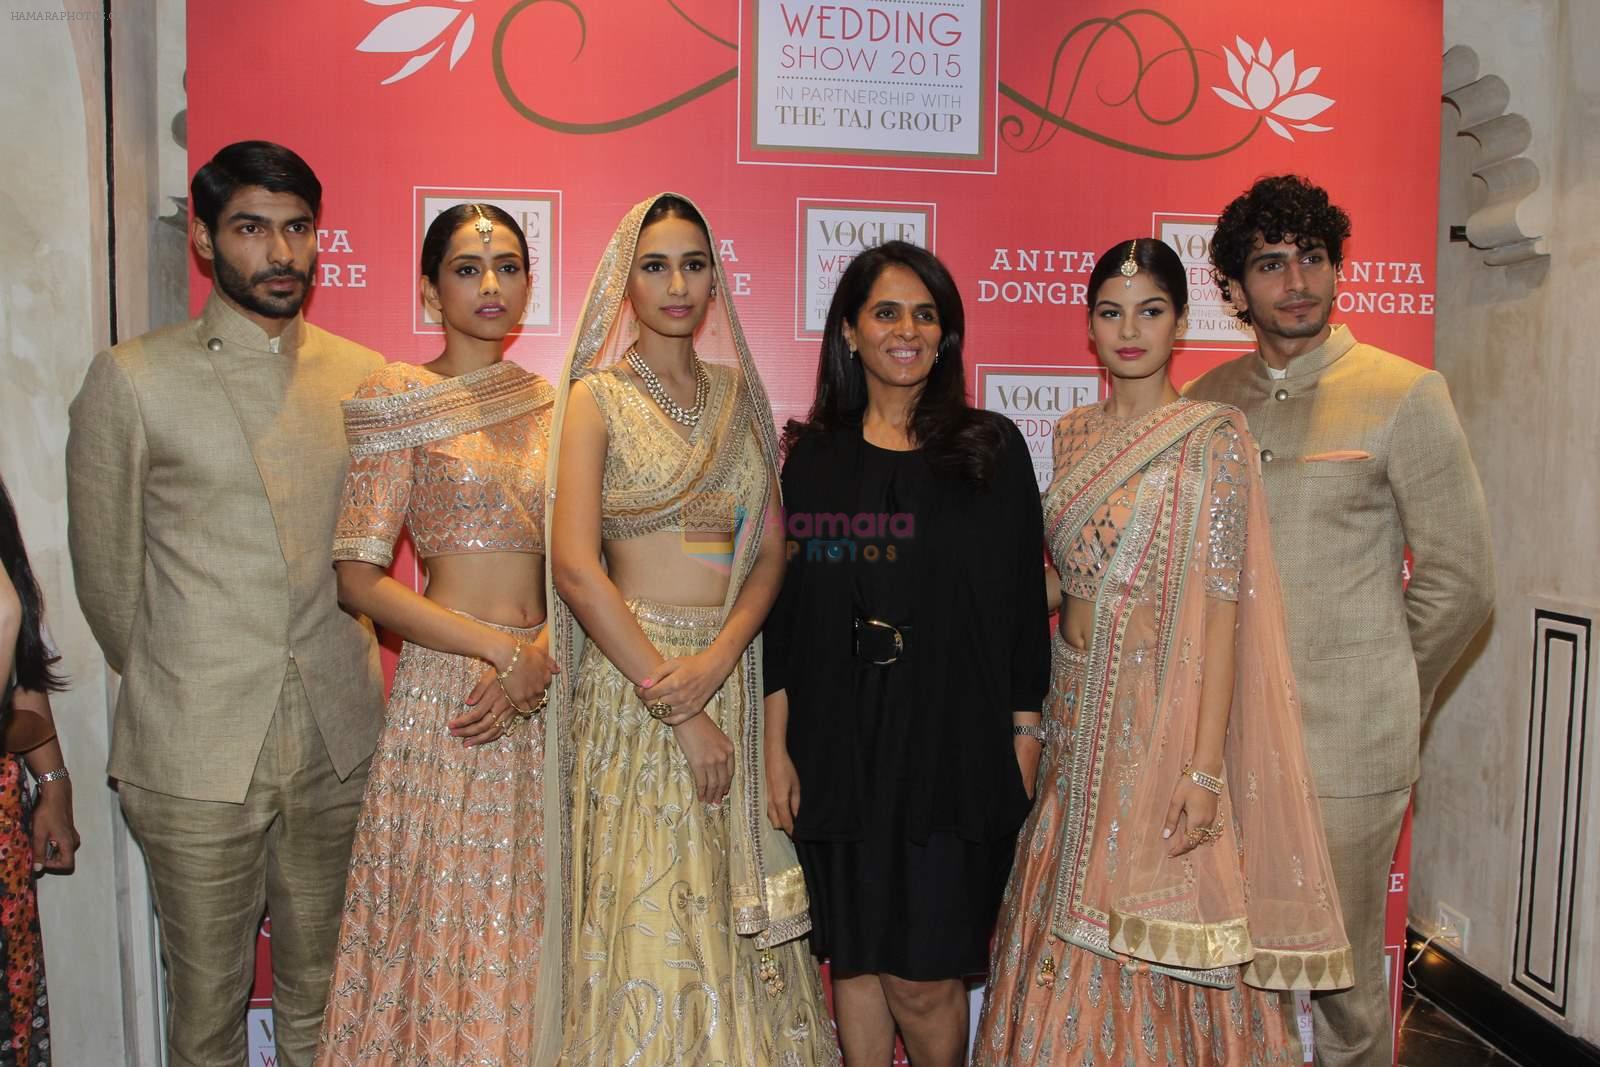 Anita Dongre and Vogue Wedding show preview in Khar on 3rd July 2015